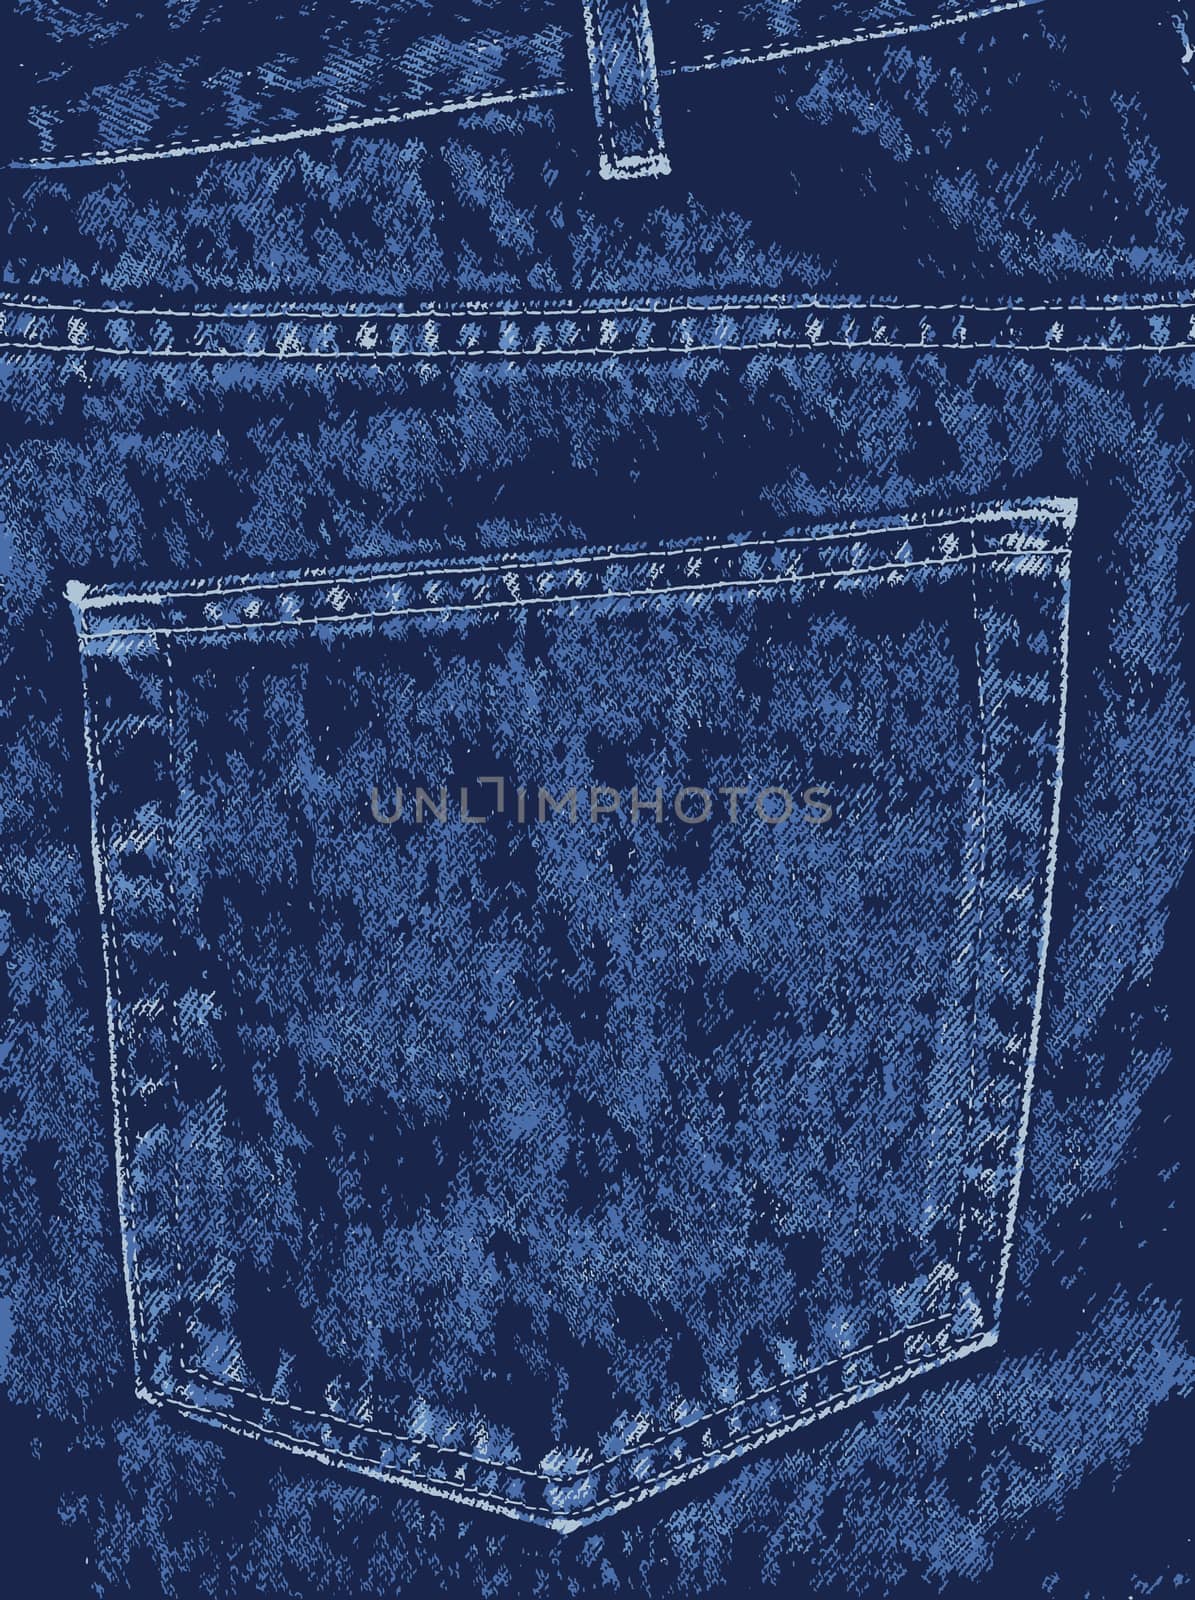 A blue denim pocket on a pair of old jeans as a background